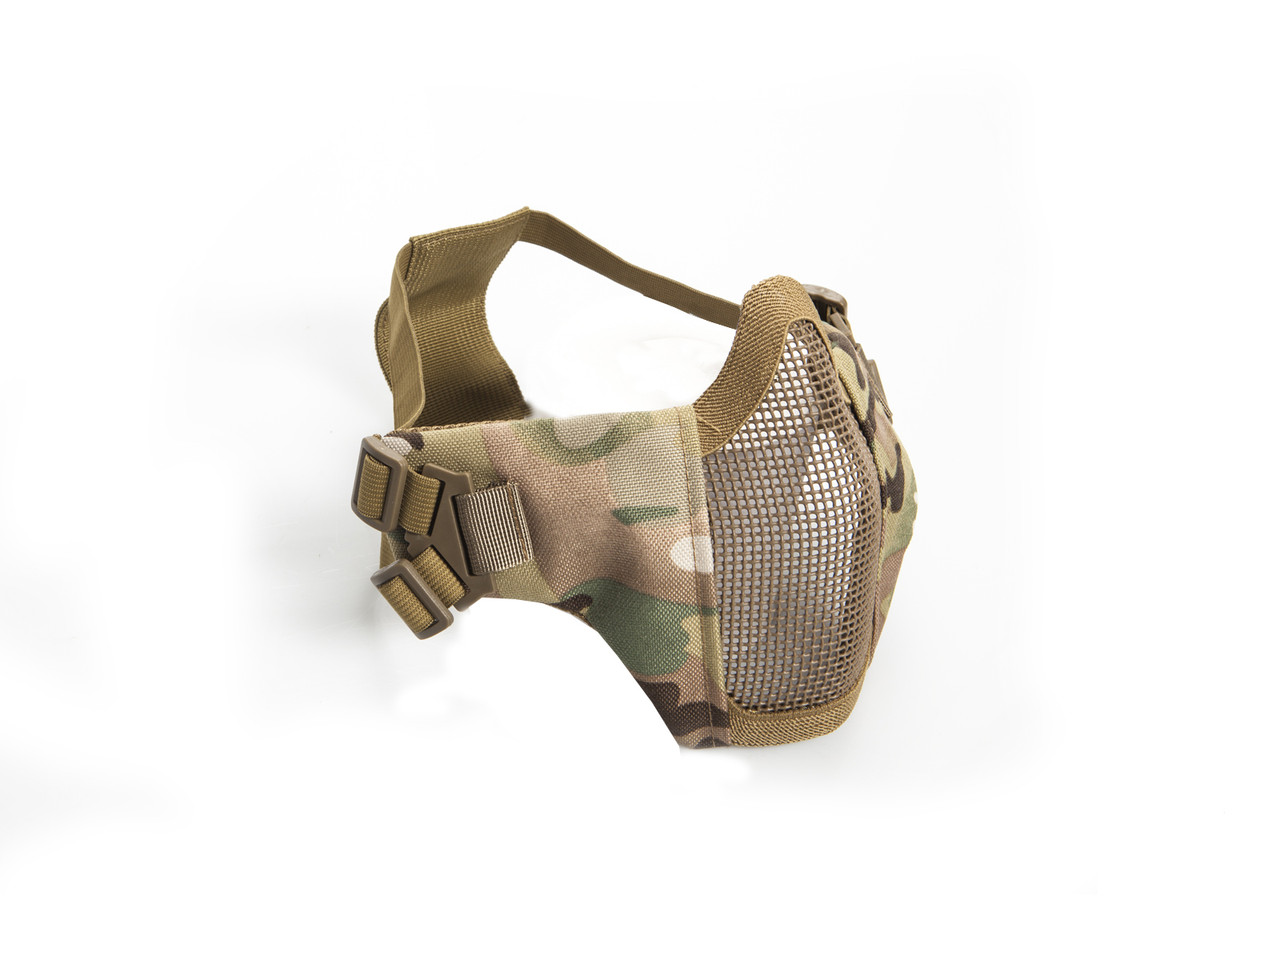 ASG Metal mesh mask with cheek pads, Multicam